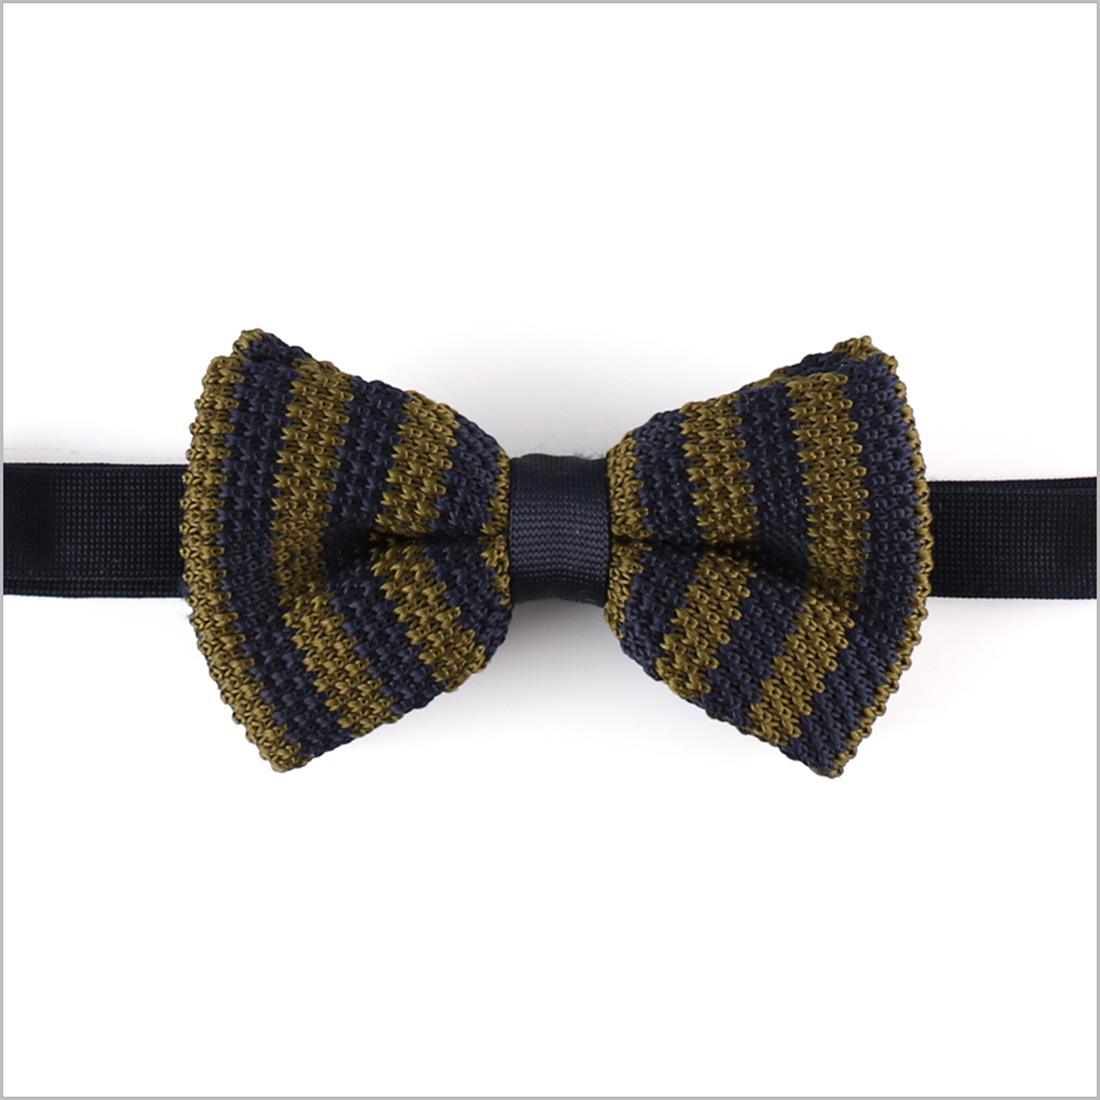 Classic Polyester Knitted Men's Bow Tie (YWZJ 55)